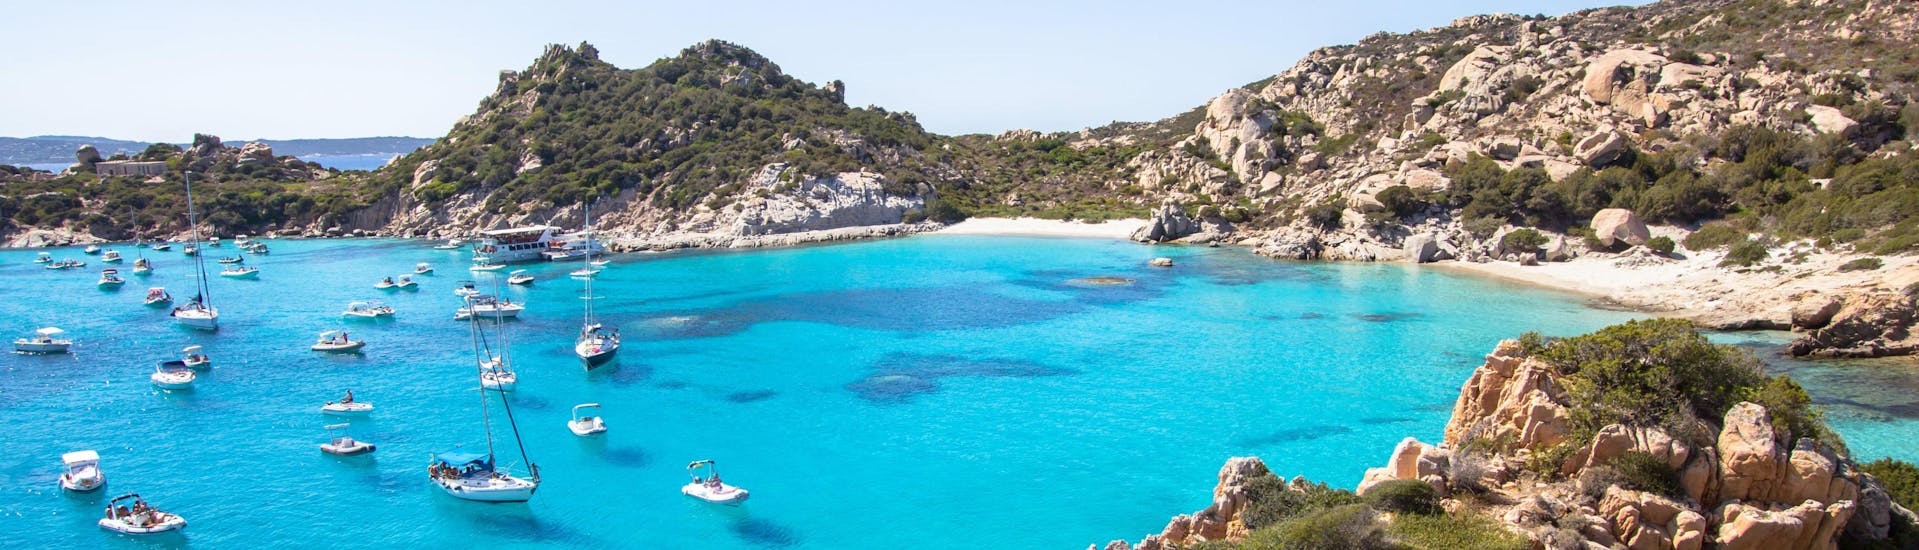 An image of the beautiful Cala Corsada, one of the places you get to visit on a boat tour from Palau.